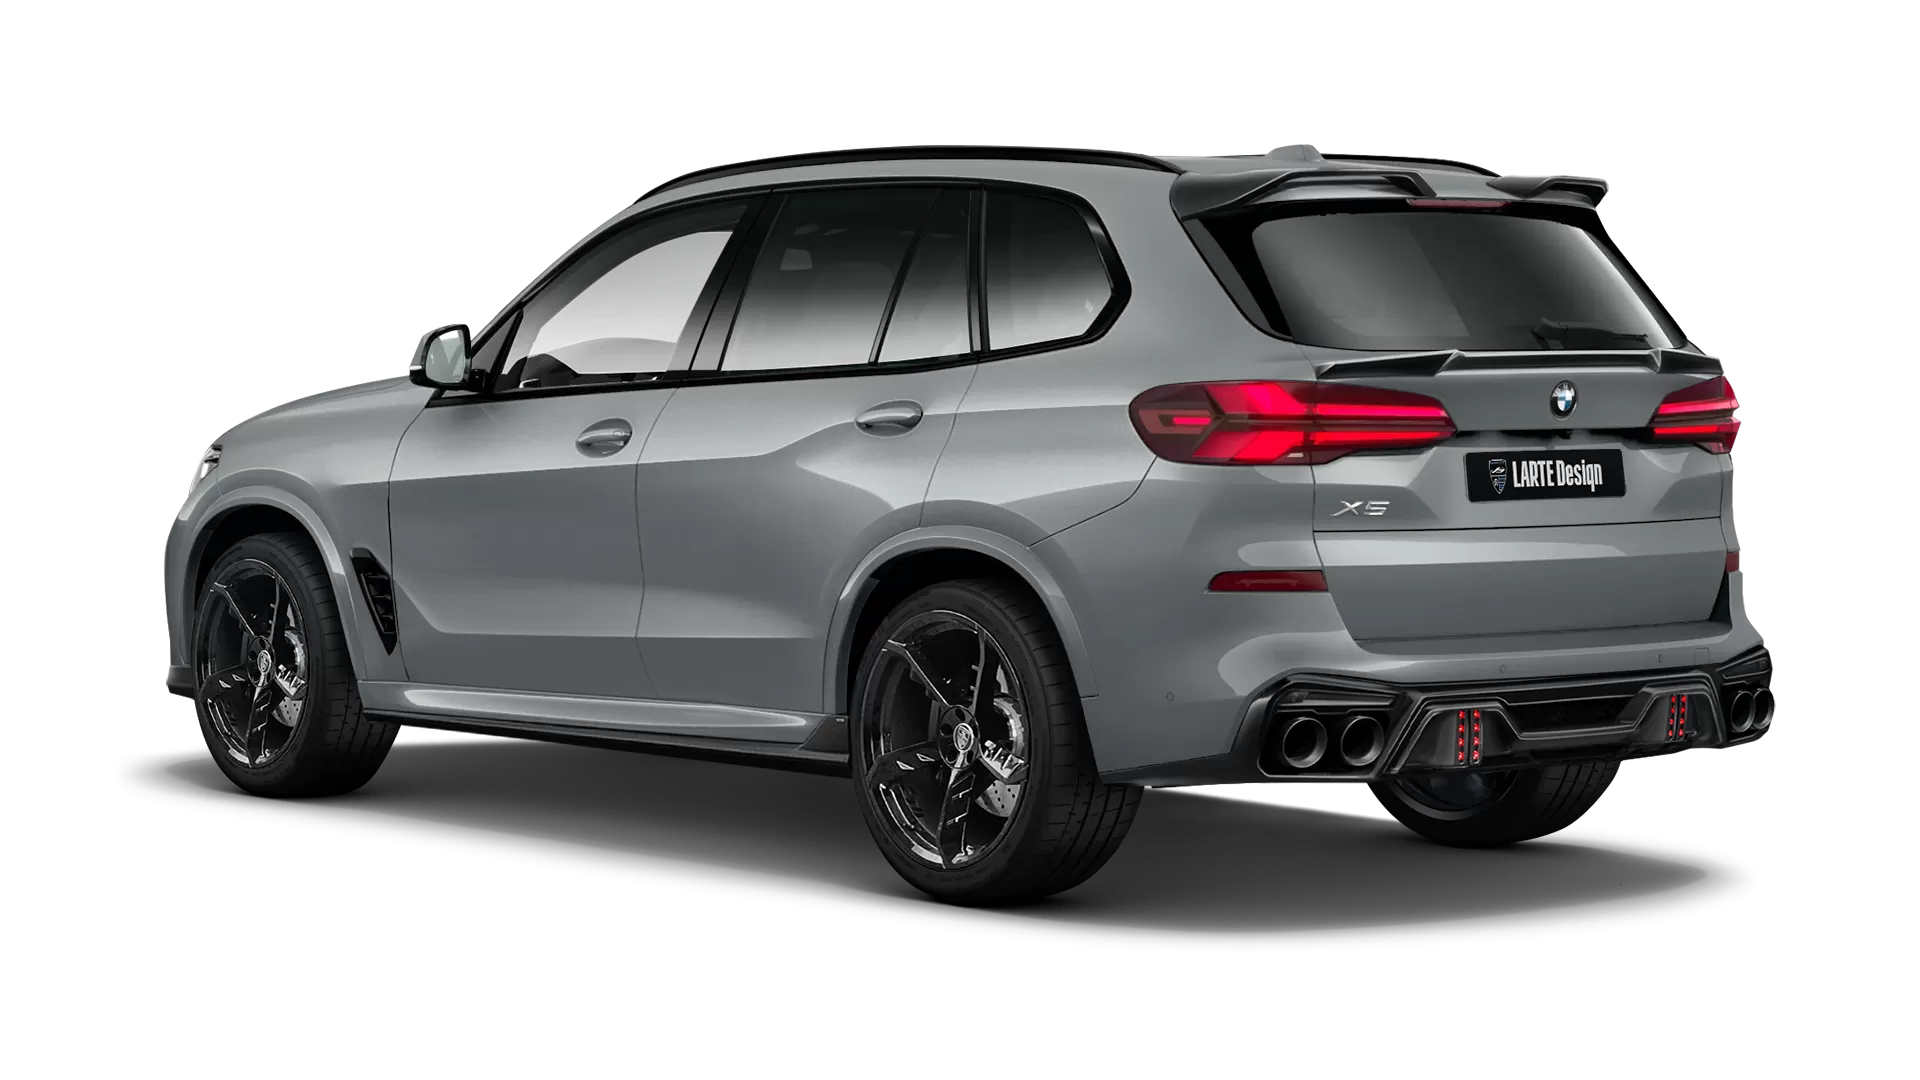 BMW X5 G05 LCI Facelift with painted body kit: rear view shown in Brooklyn Grey